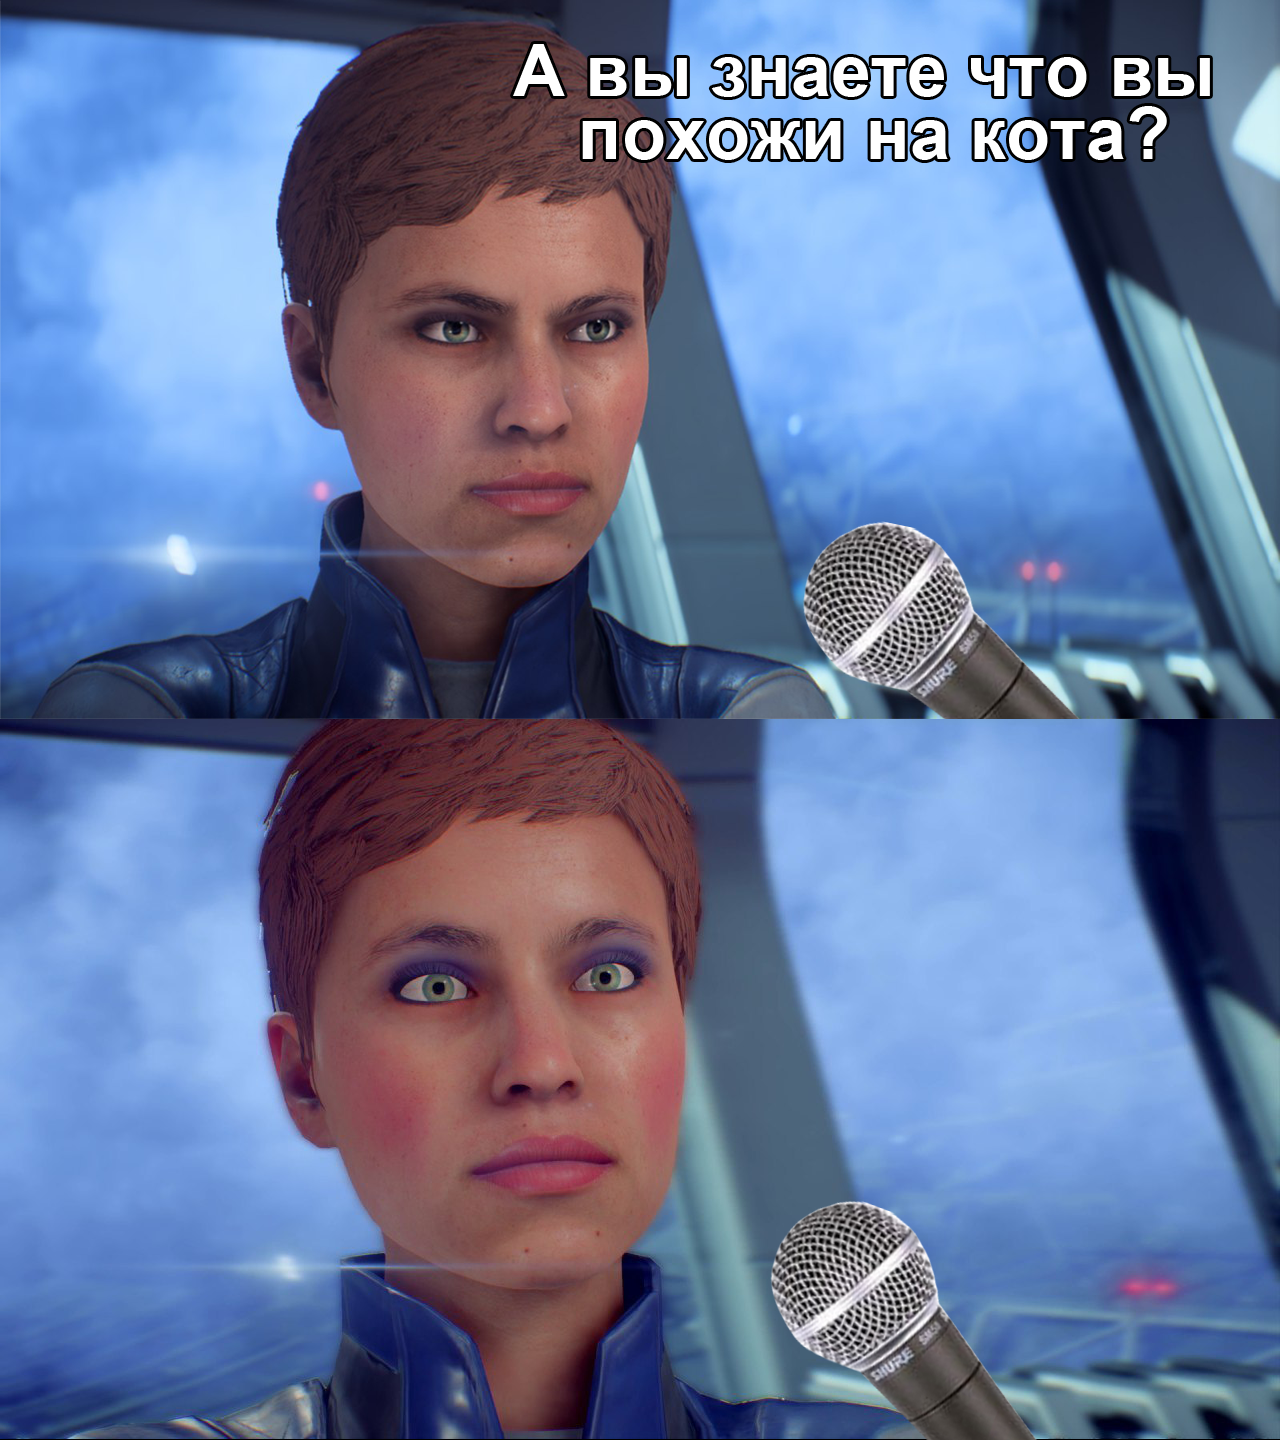 Do you know what...? - Humor, Memes, Games, Face, Mass effect, Animation, cat, Andromeda, My